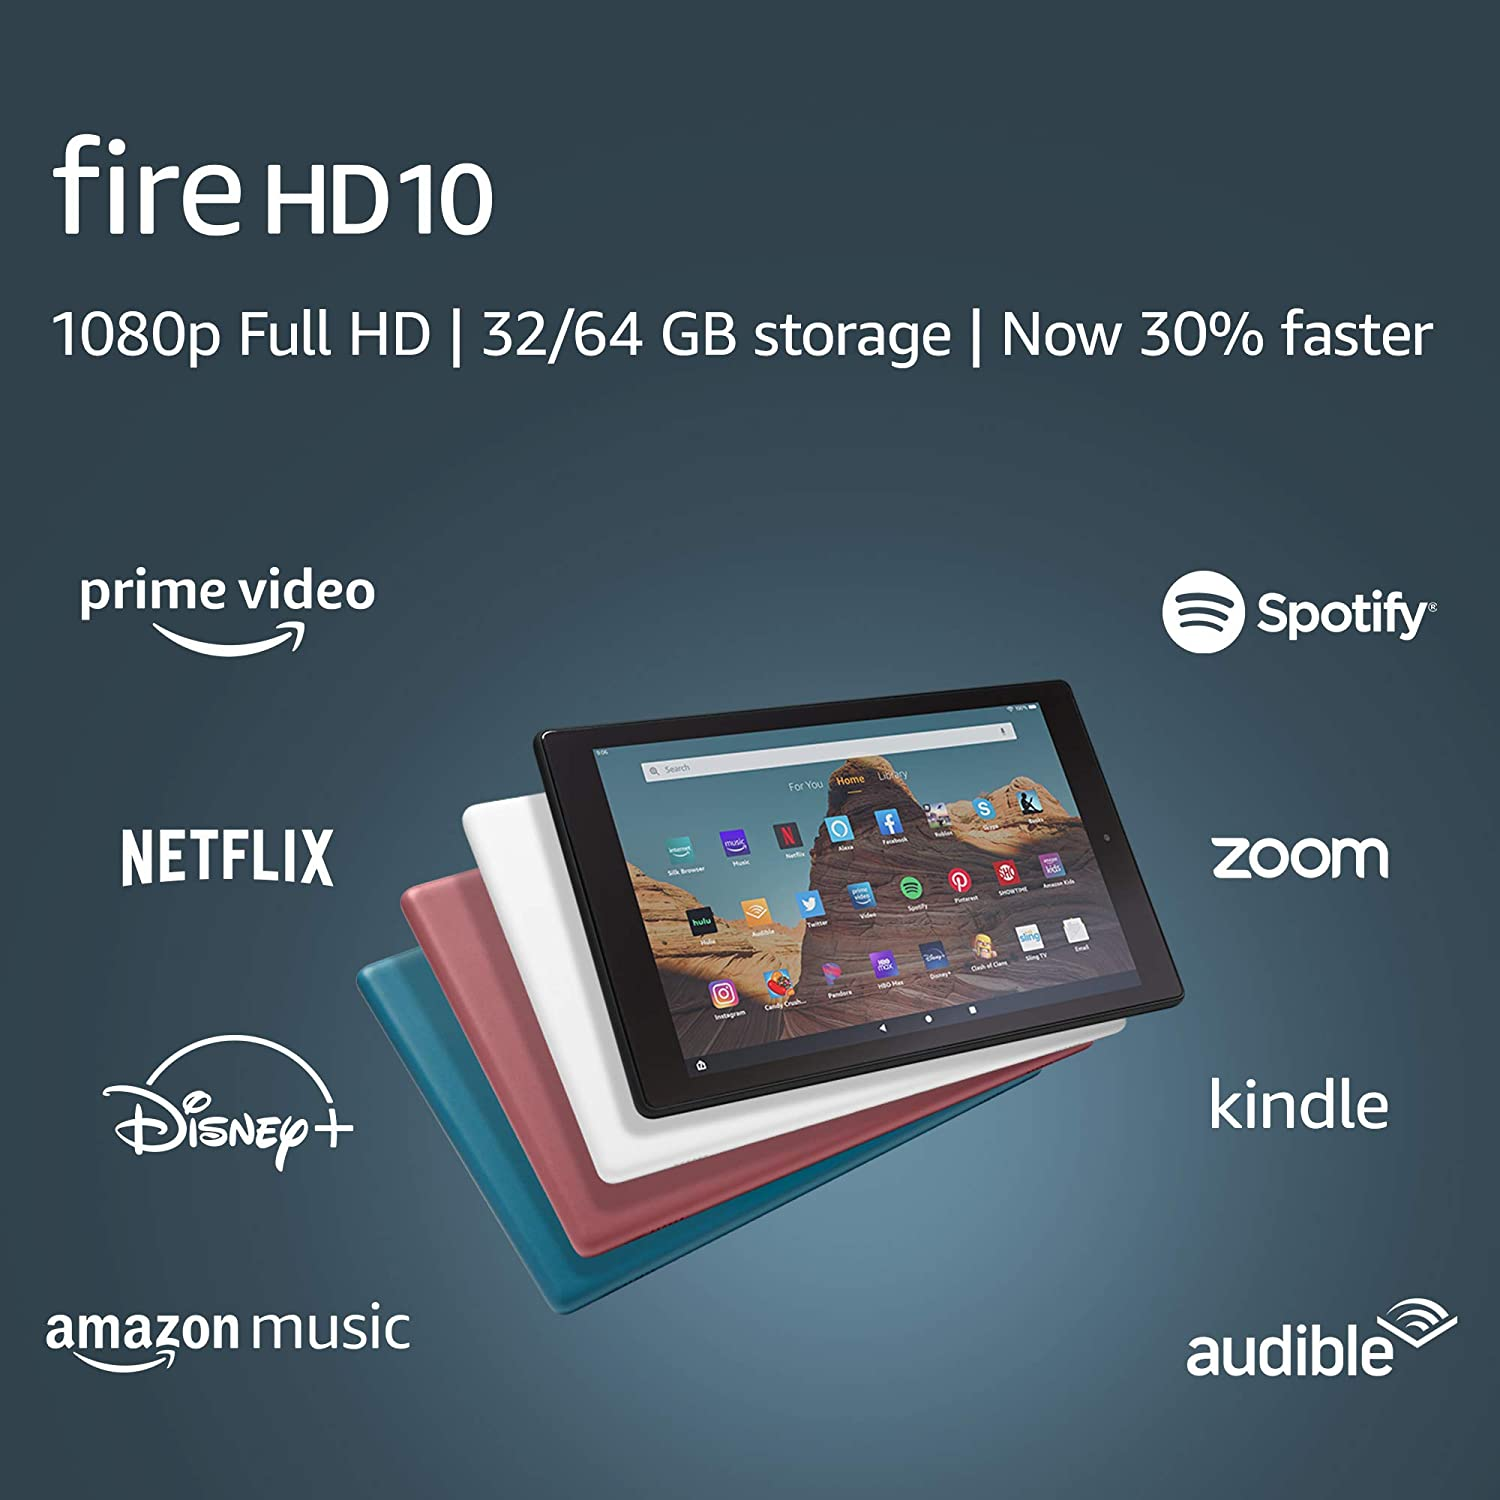 Amazon.com: Fire HD 10 Tablet (10.1" 1080p full HD display, 32 GB) – White or Plum (2019 Release) $74.99